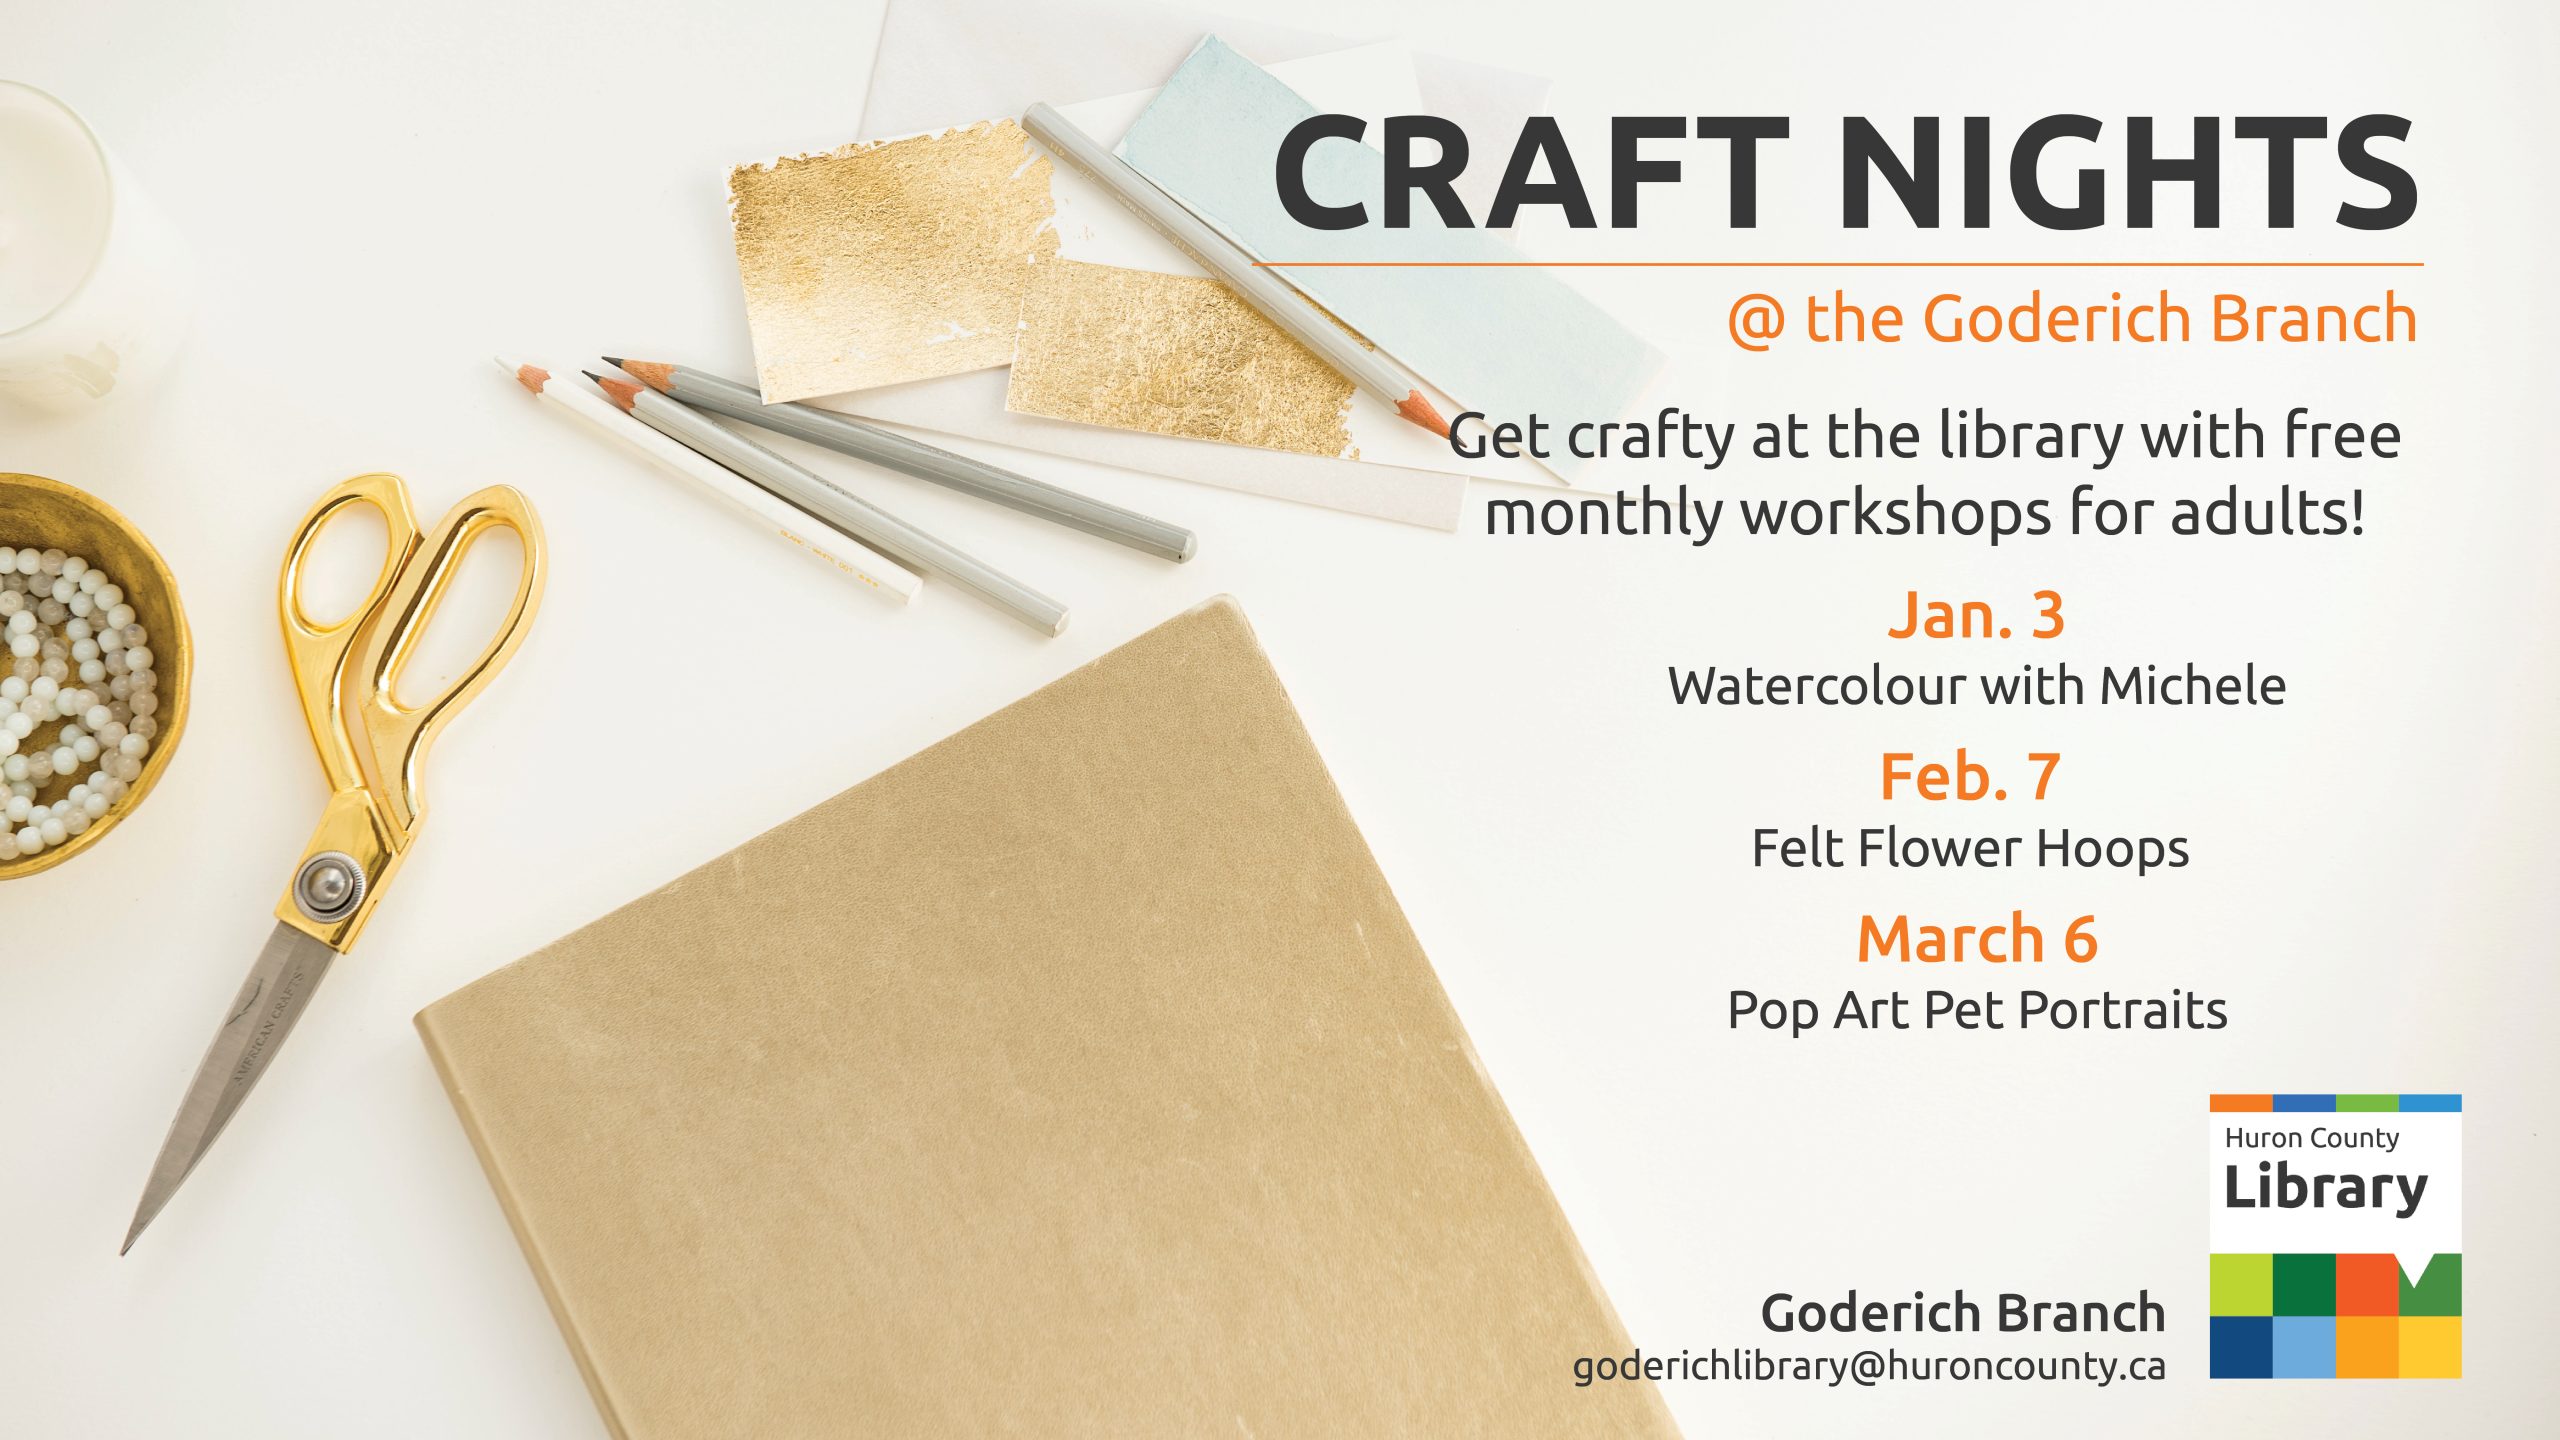 Photo of craft supplies with text promoting adult craft nights at Goderich